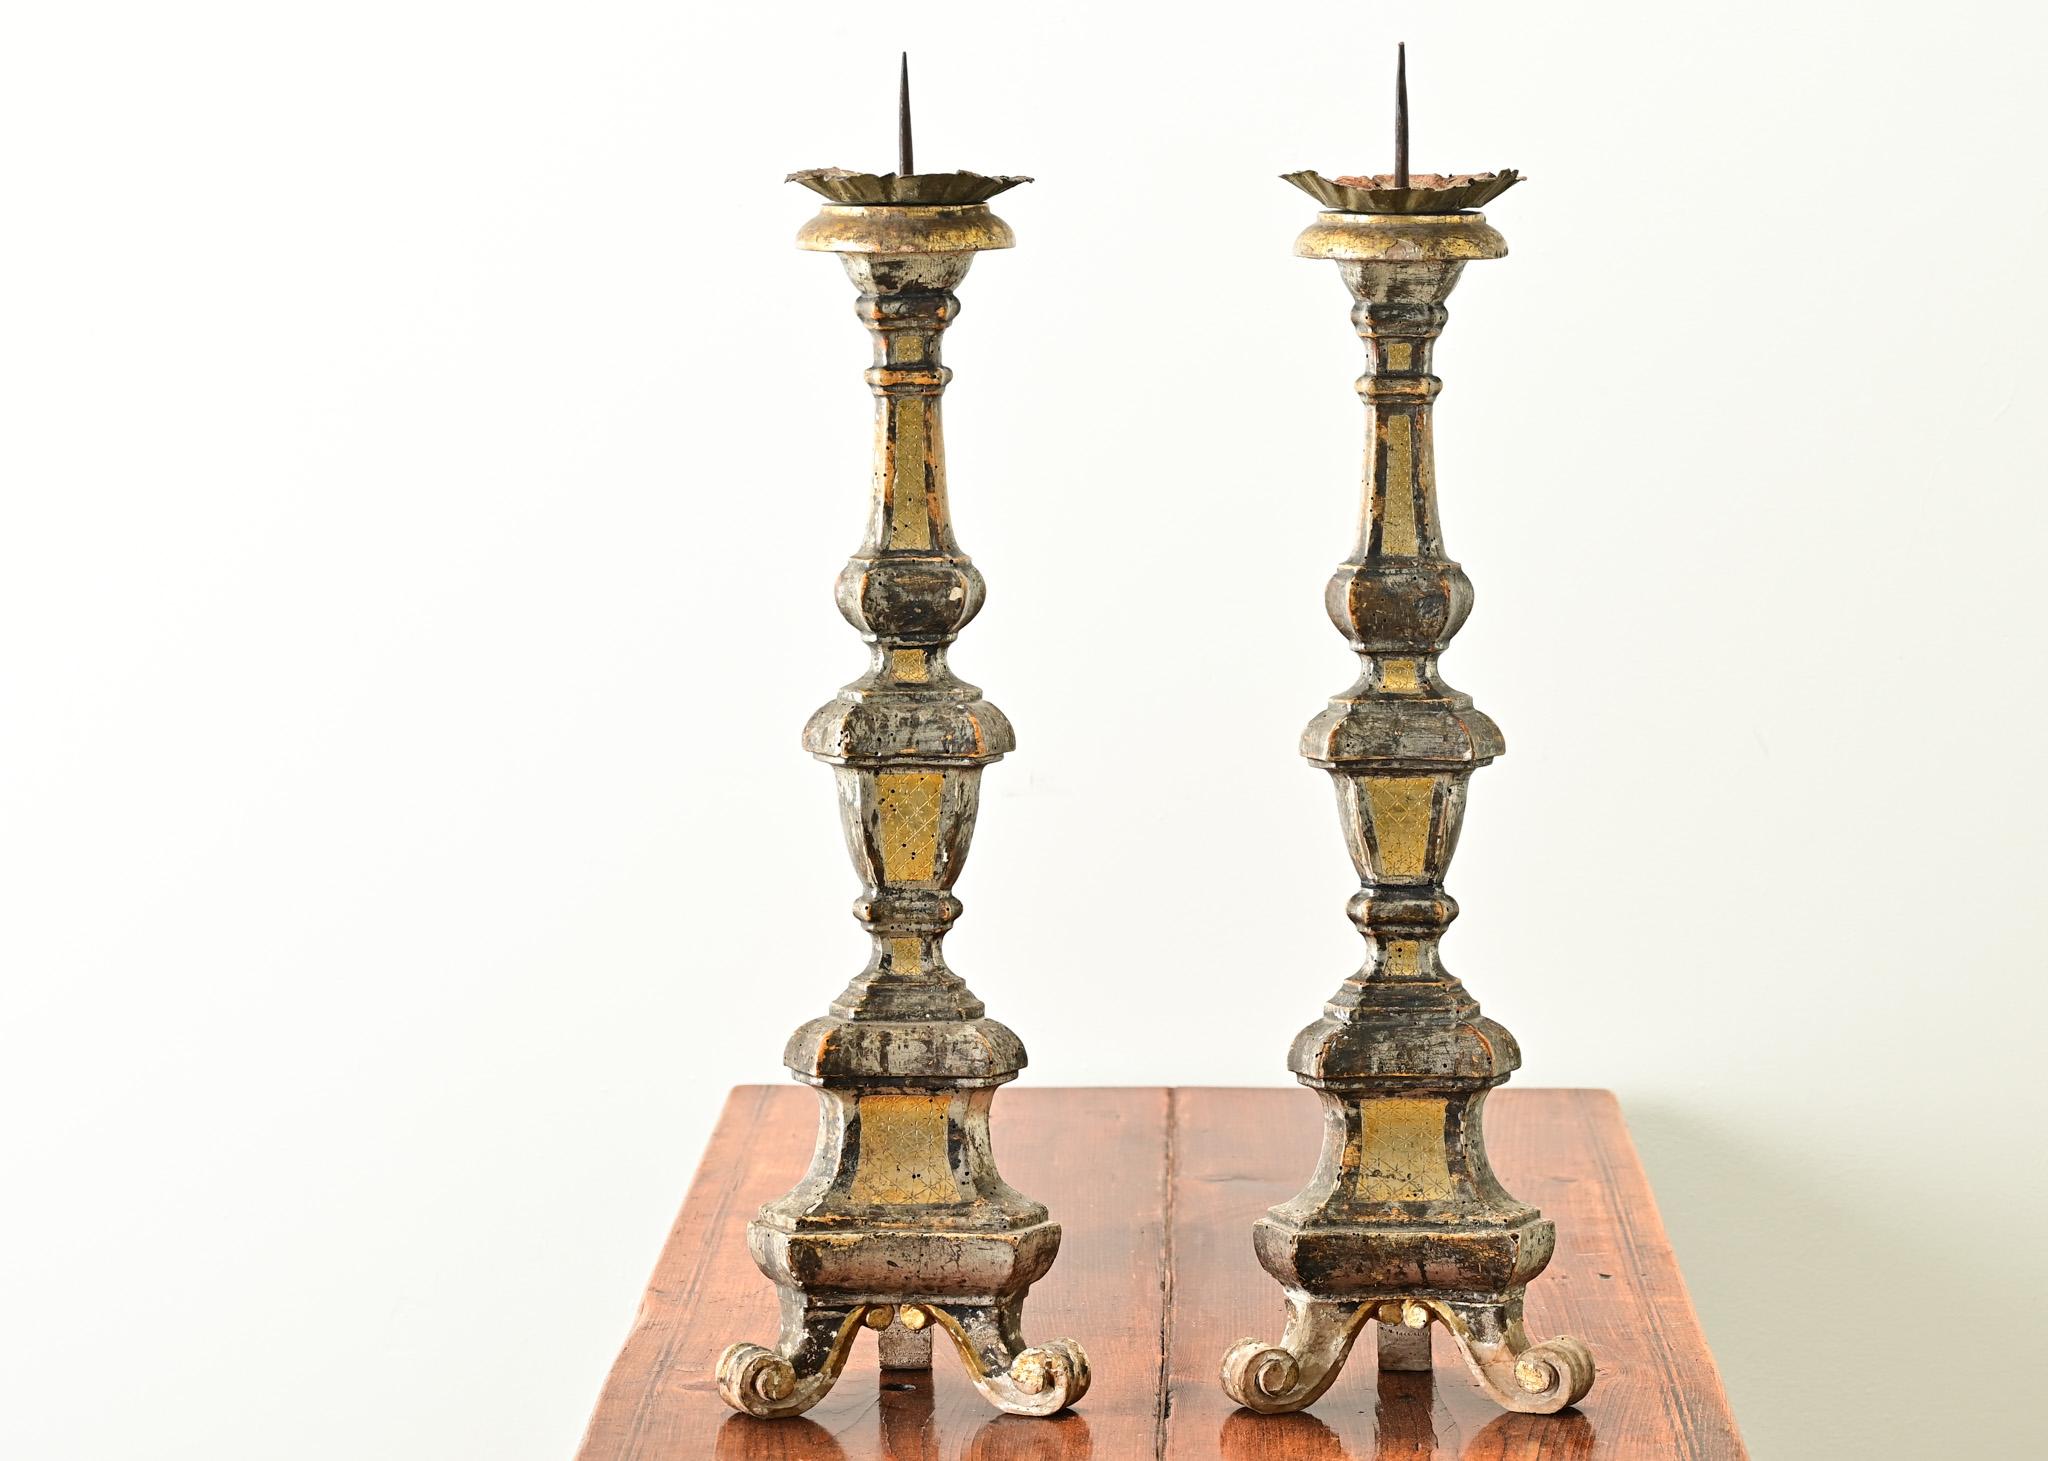 A pair of Italian giltwood candlesticks from the 1500’s. This impressive hand-carved pair of candlesticks have stayed together for over 400 years. Gold and silver gilt is found on the front of the candlesticks to save money, the back is painted.